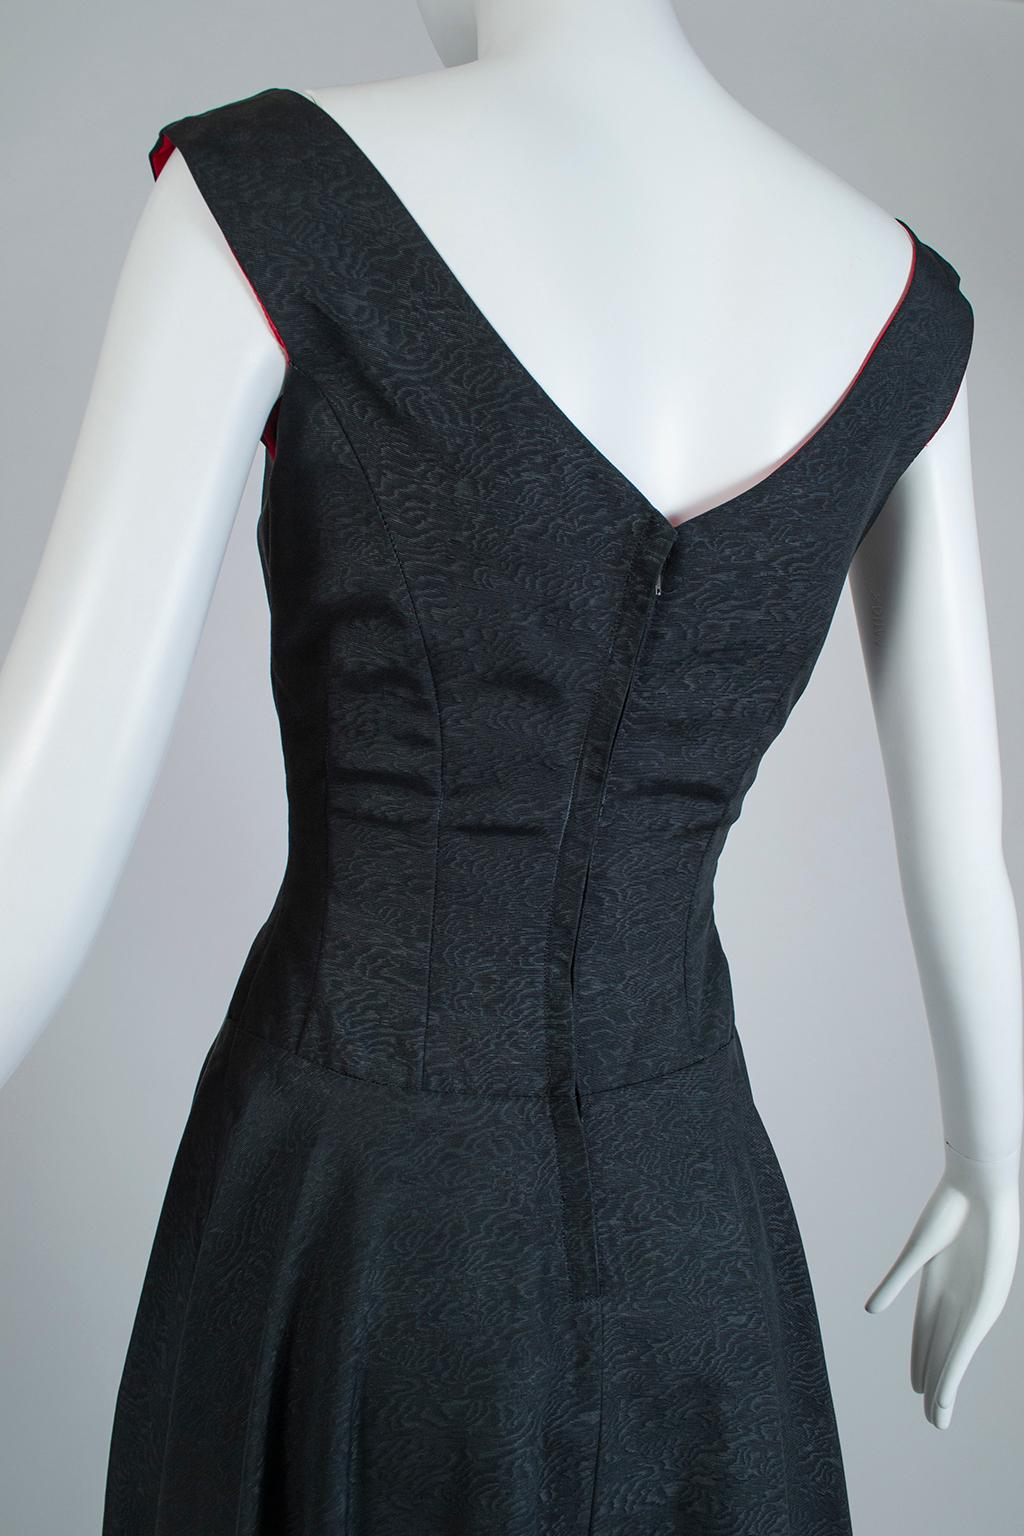 Women's Black Silk Moiré Jeweled Tea Dress and Red-Lined Opera Coat Ensemble - XS, 1950s For Sale